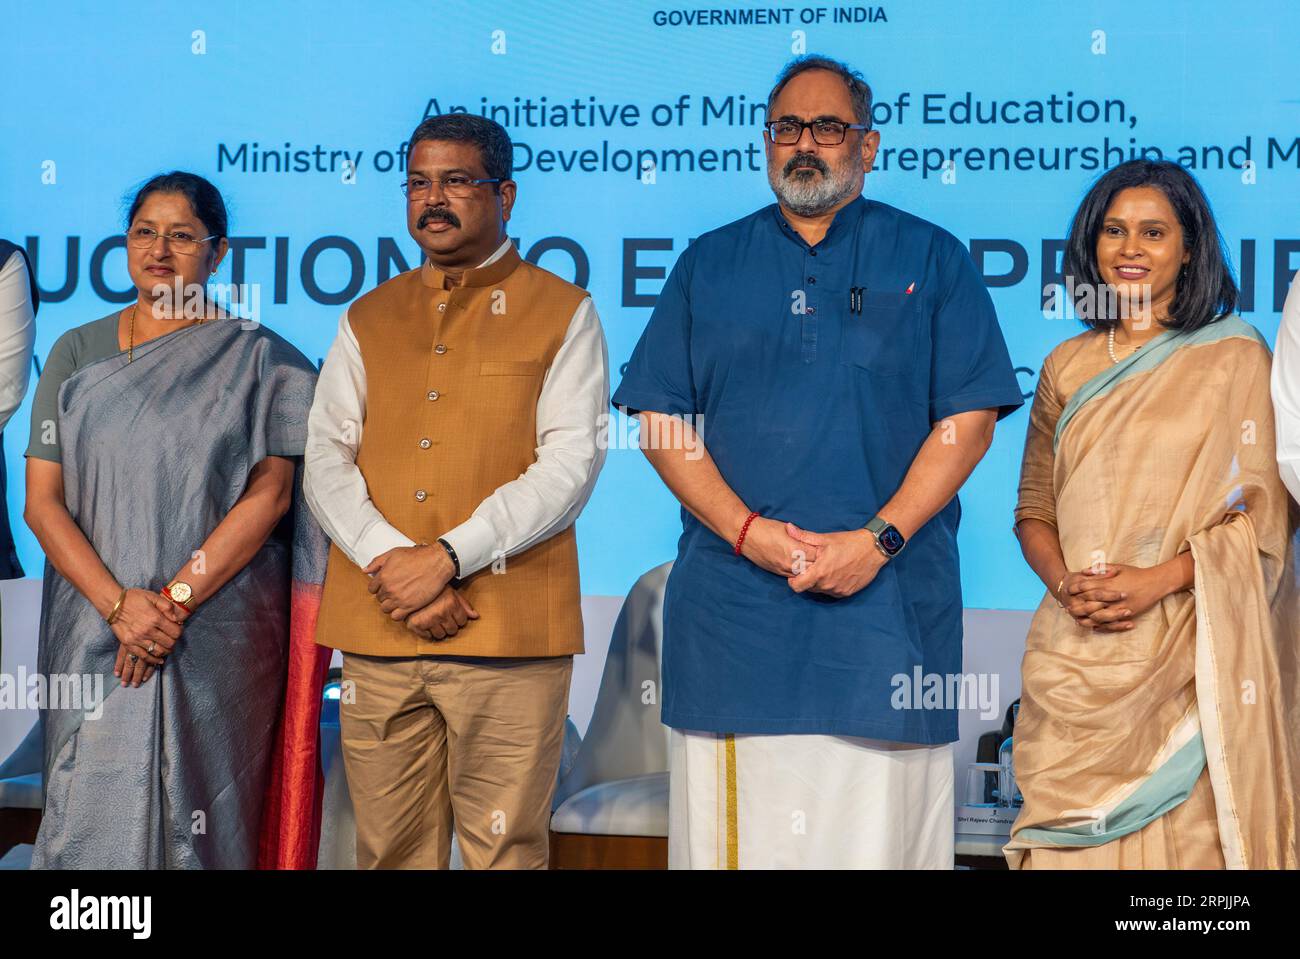 (L to R) Annapurna Devi, Minister of State, Ministry of Education, Dharmendra Pradhan Education Minister of India, Rajeev Chandrasekhar, Hon'ble Minister of State for Electronics and Information Technology and Skill Development & Entrepreneurship with Sandhya Devanathan Head and Vice President of Meta India pose for group photos during the launch of initiative ' Education to Entrepreneurship' in New Delhi. Meta (formerly Facebook) has partnered with the Ministry of Education and the Ministry of Skill Development and Entrepreneurship launch an initiative called 'Education to Entrepreneurship' Stock Photo